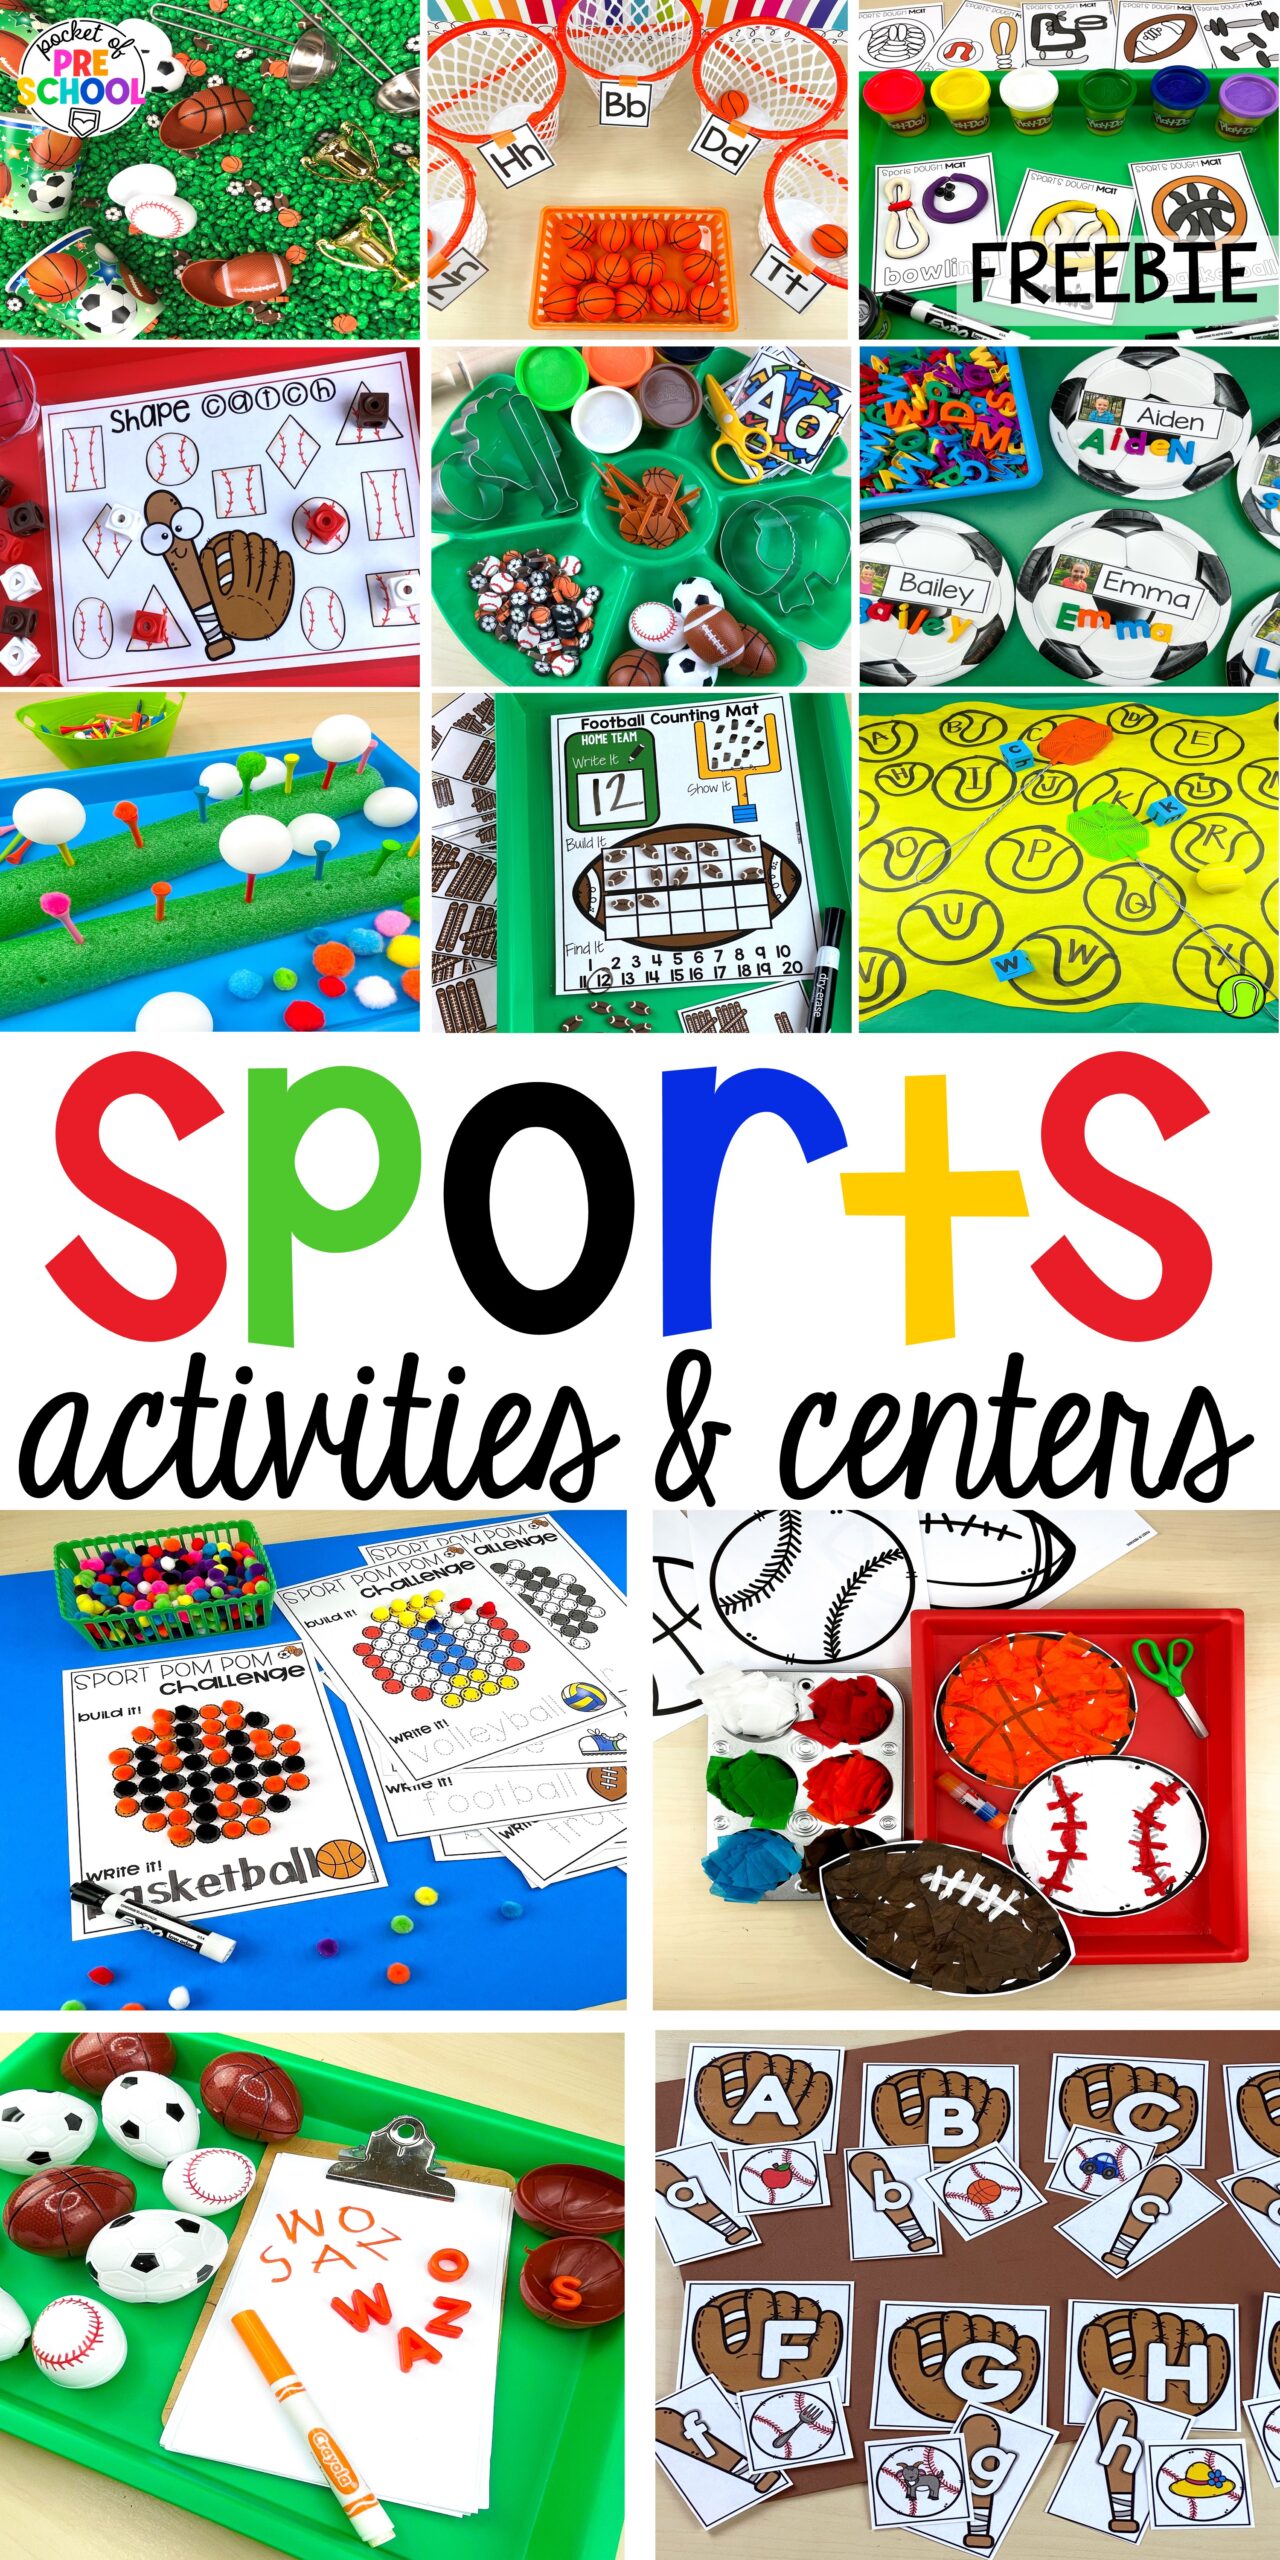 Get tons of ideas for a sports theme in your preschool, pre-k, or kindergarten classroom. There are ideas for math, literacy, fine motor, science, art, and more!